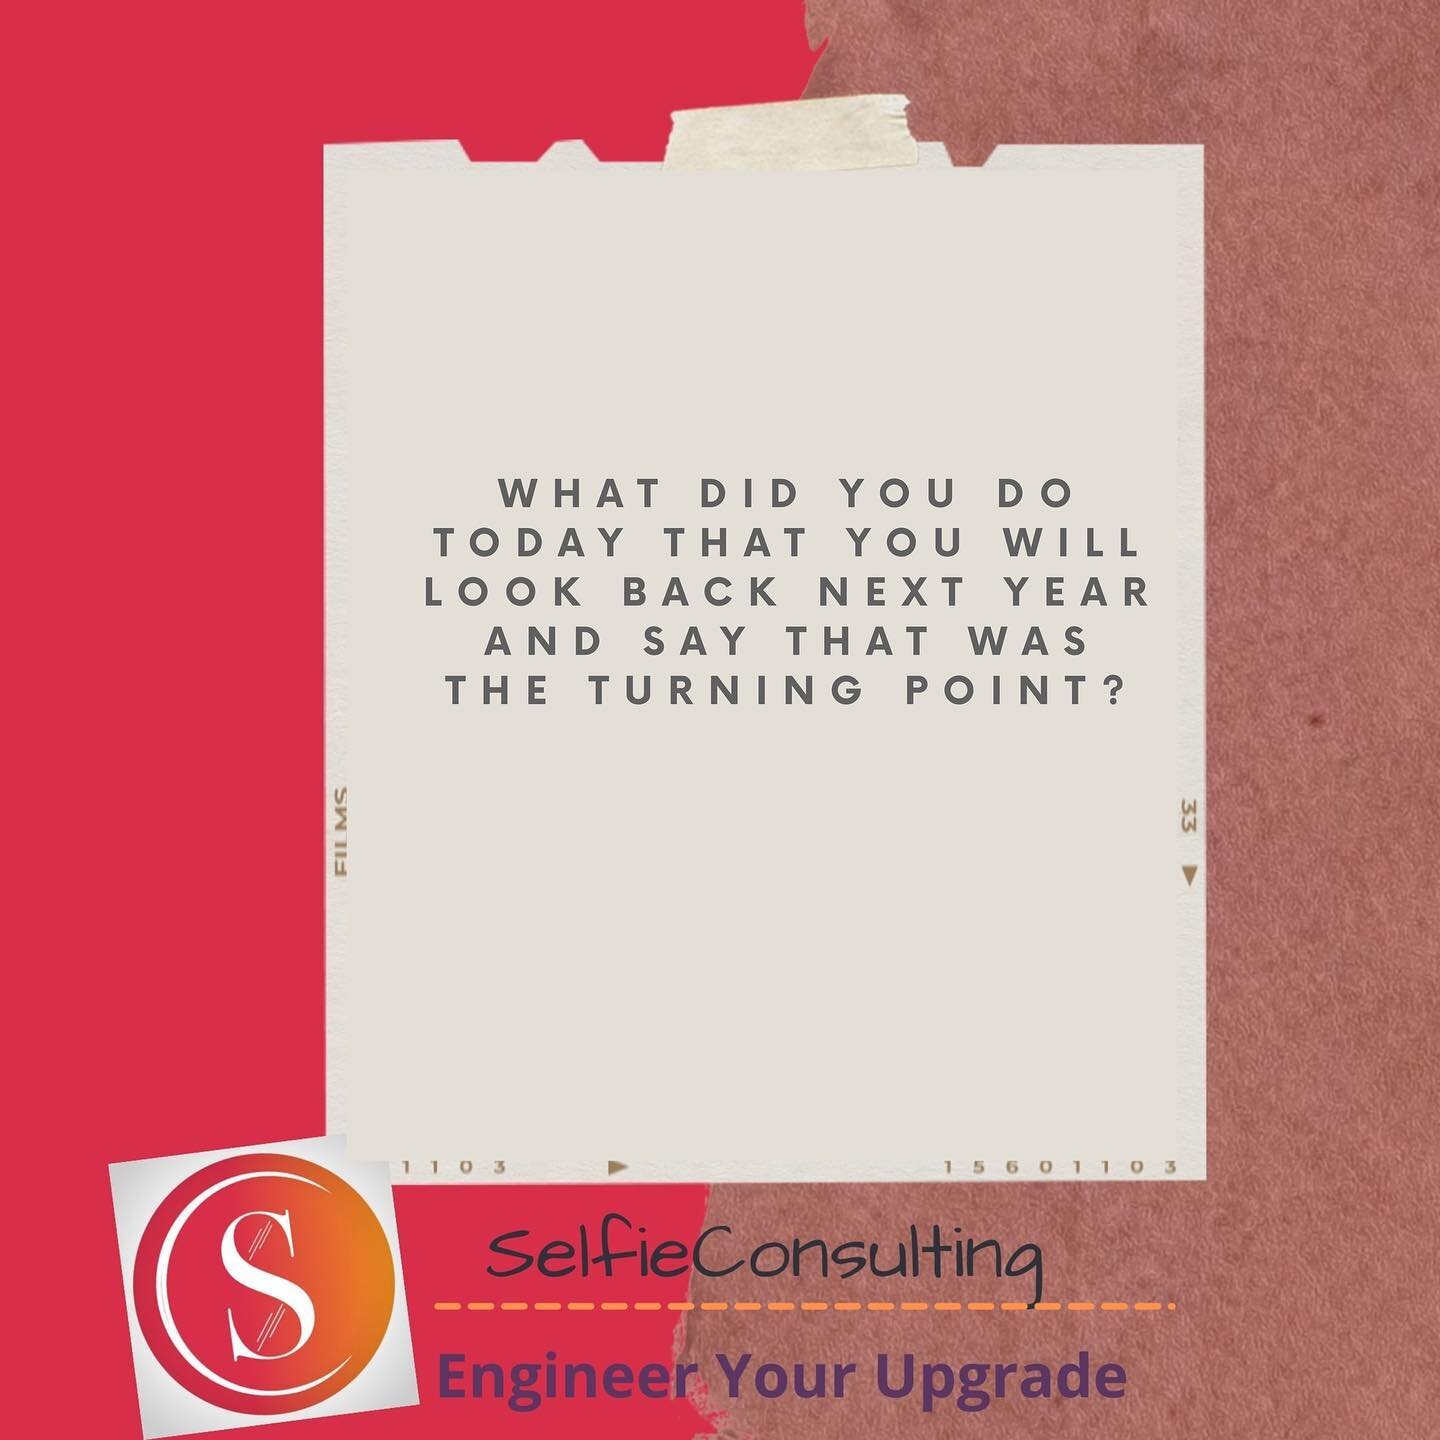 What was it? 

#selfieconsulting #selfieconsultingservices #engineeryourupagrade #putyourownmaskonfirst #inspirational #love #motivation #inspiration #life #inspirationalquotes #quotes #motivational #instagood #motivationalquotes #photooftheday #succ